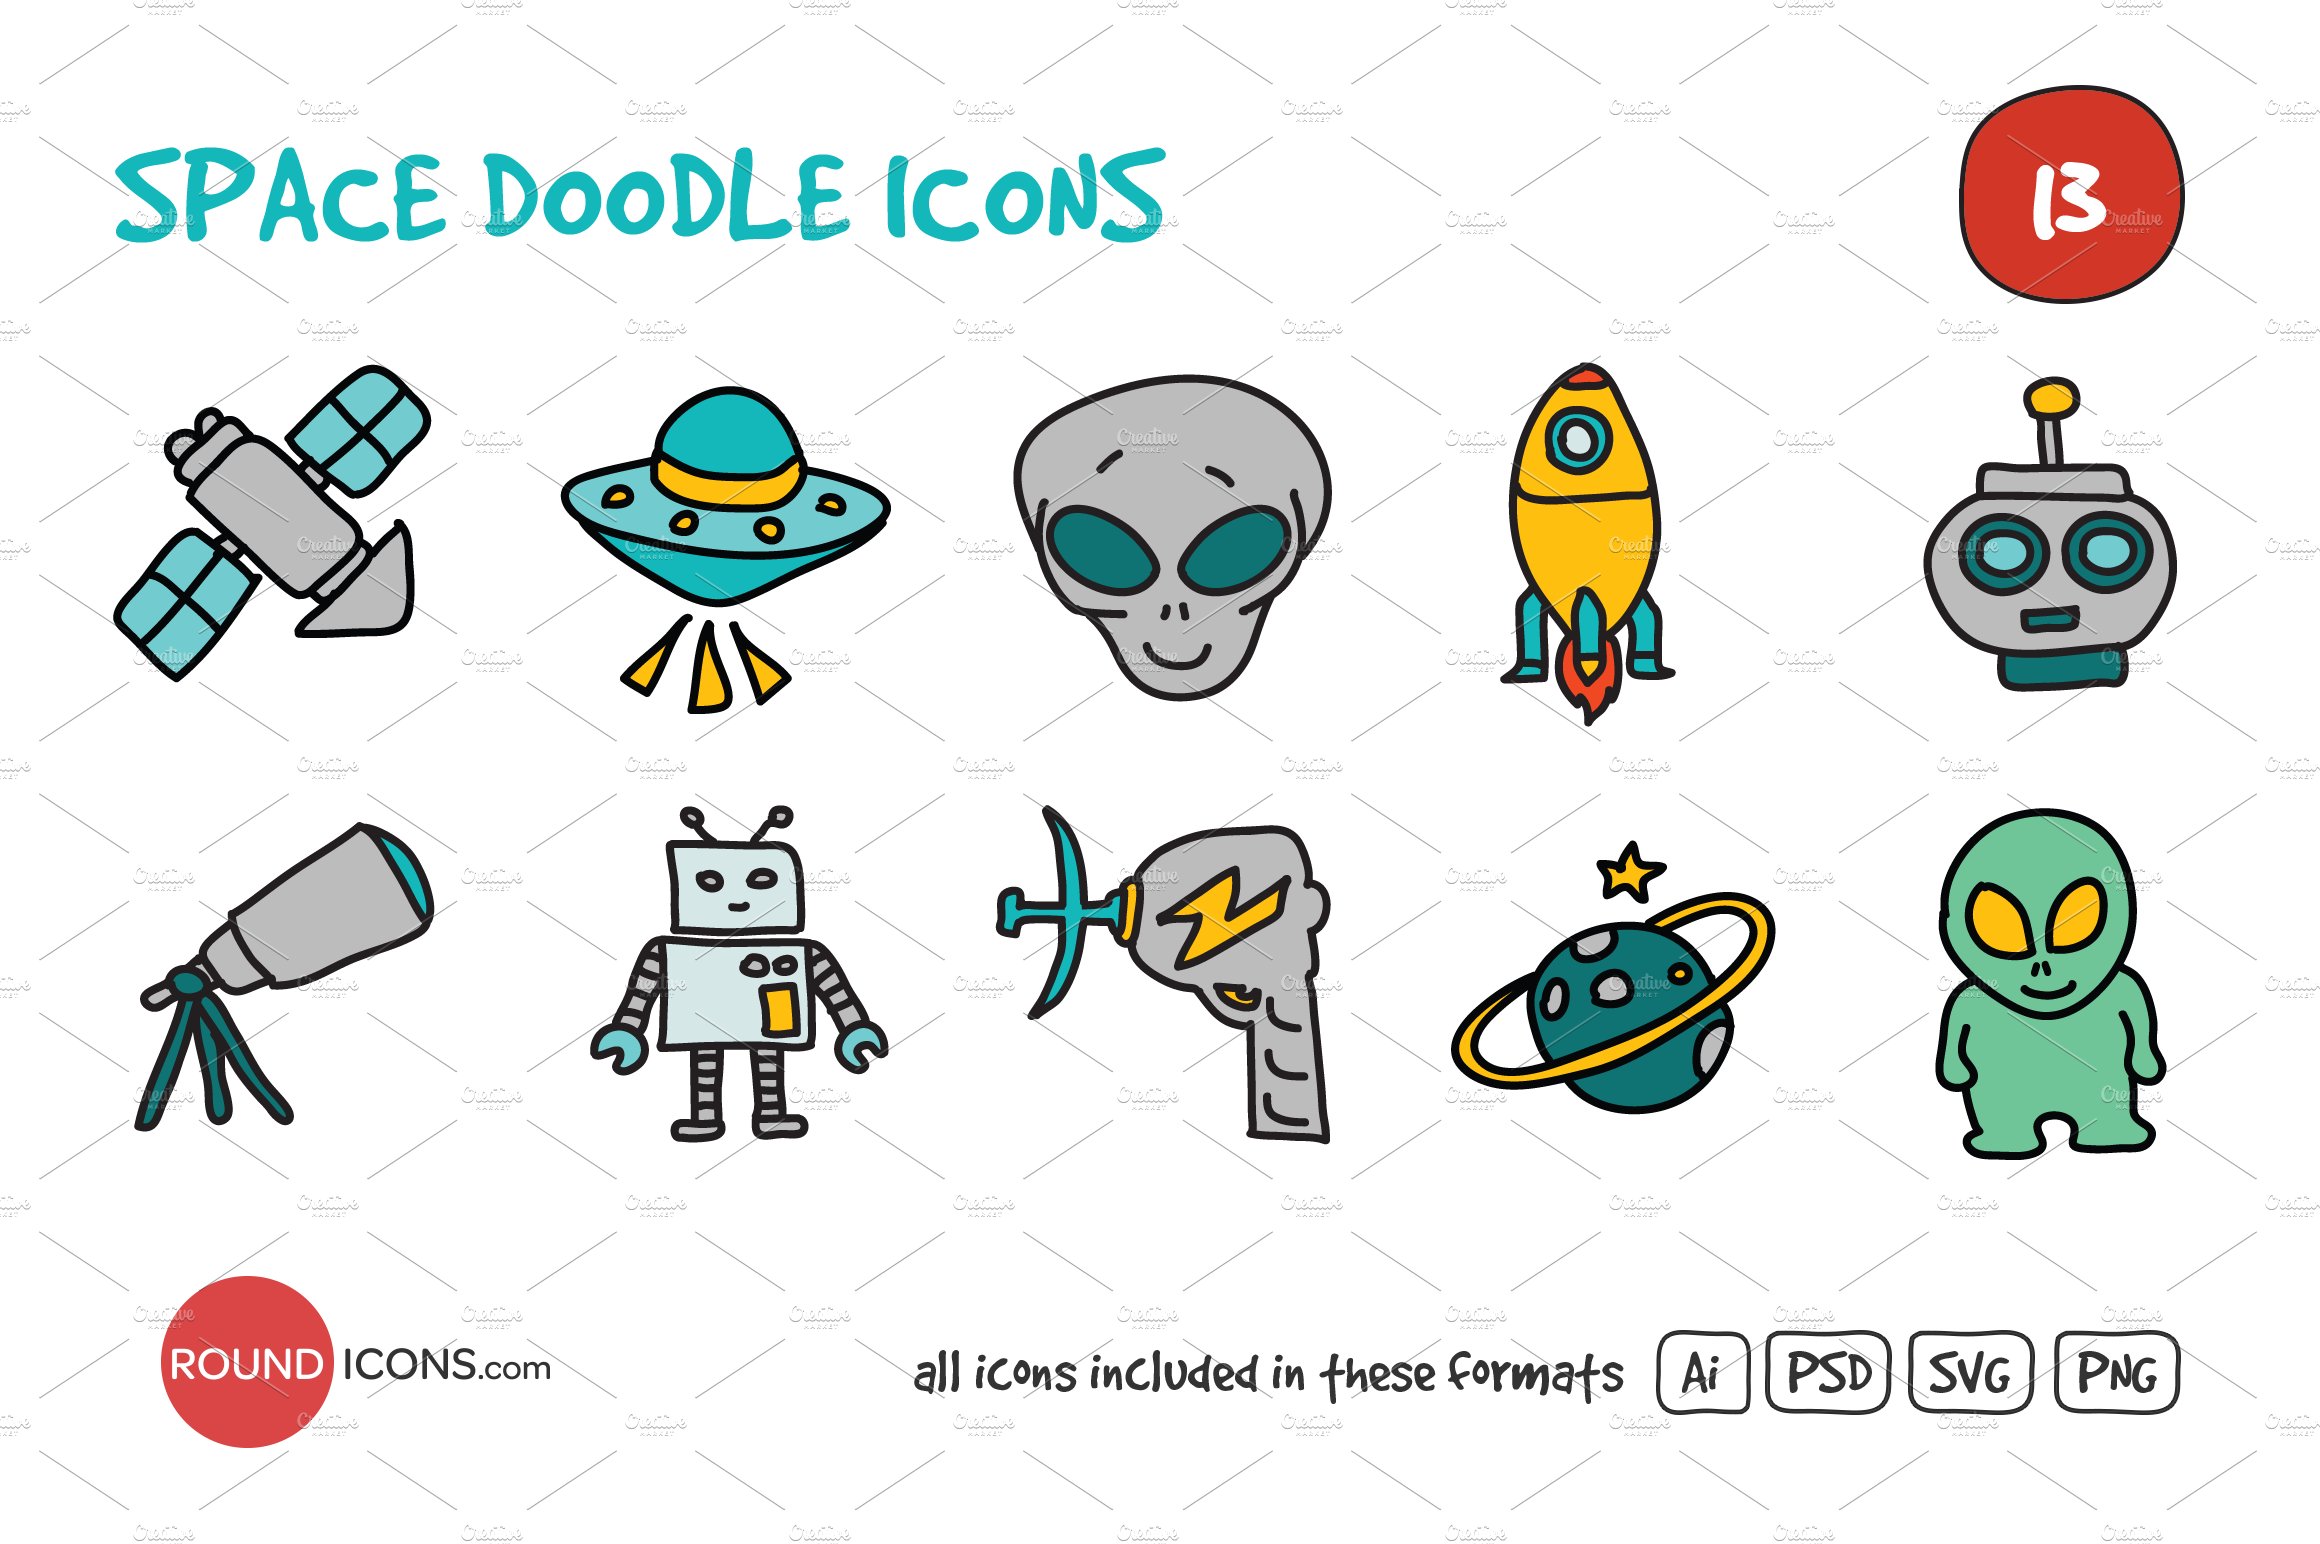 Space Doodle Icons Set cover image.